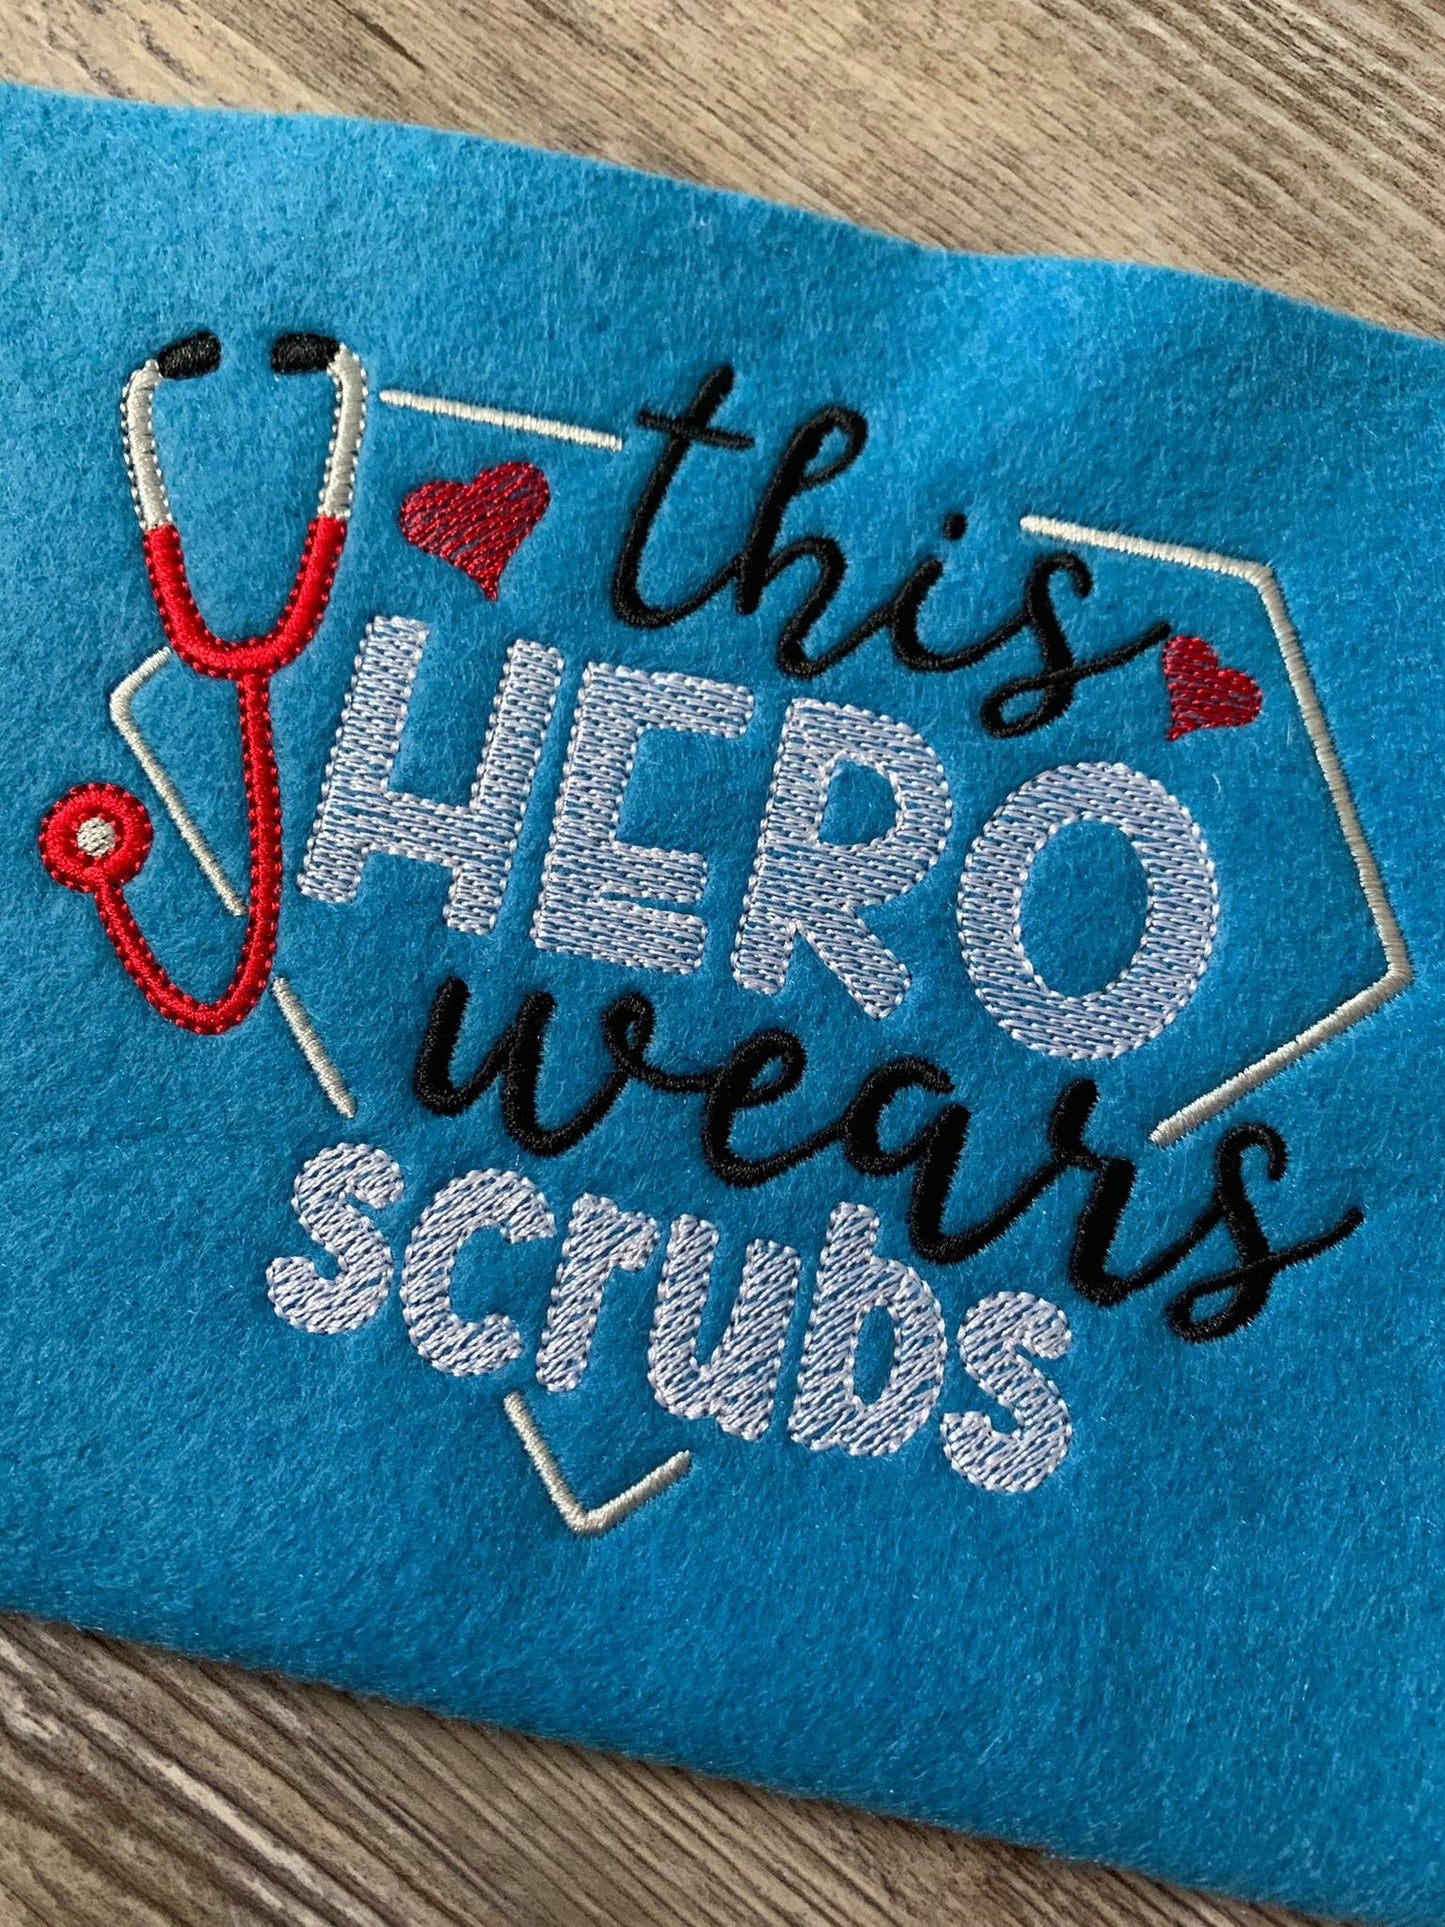 This hero wears scrubs - 3 Sizes - Digital Embroidery Design